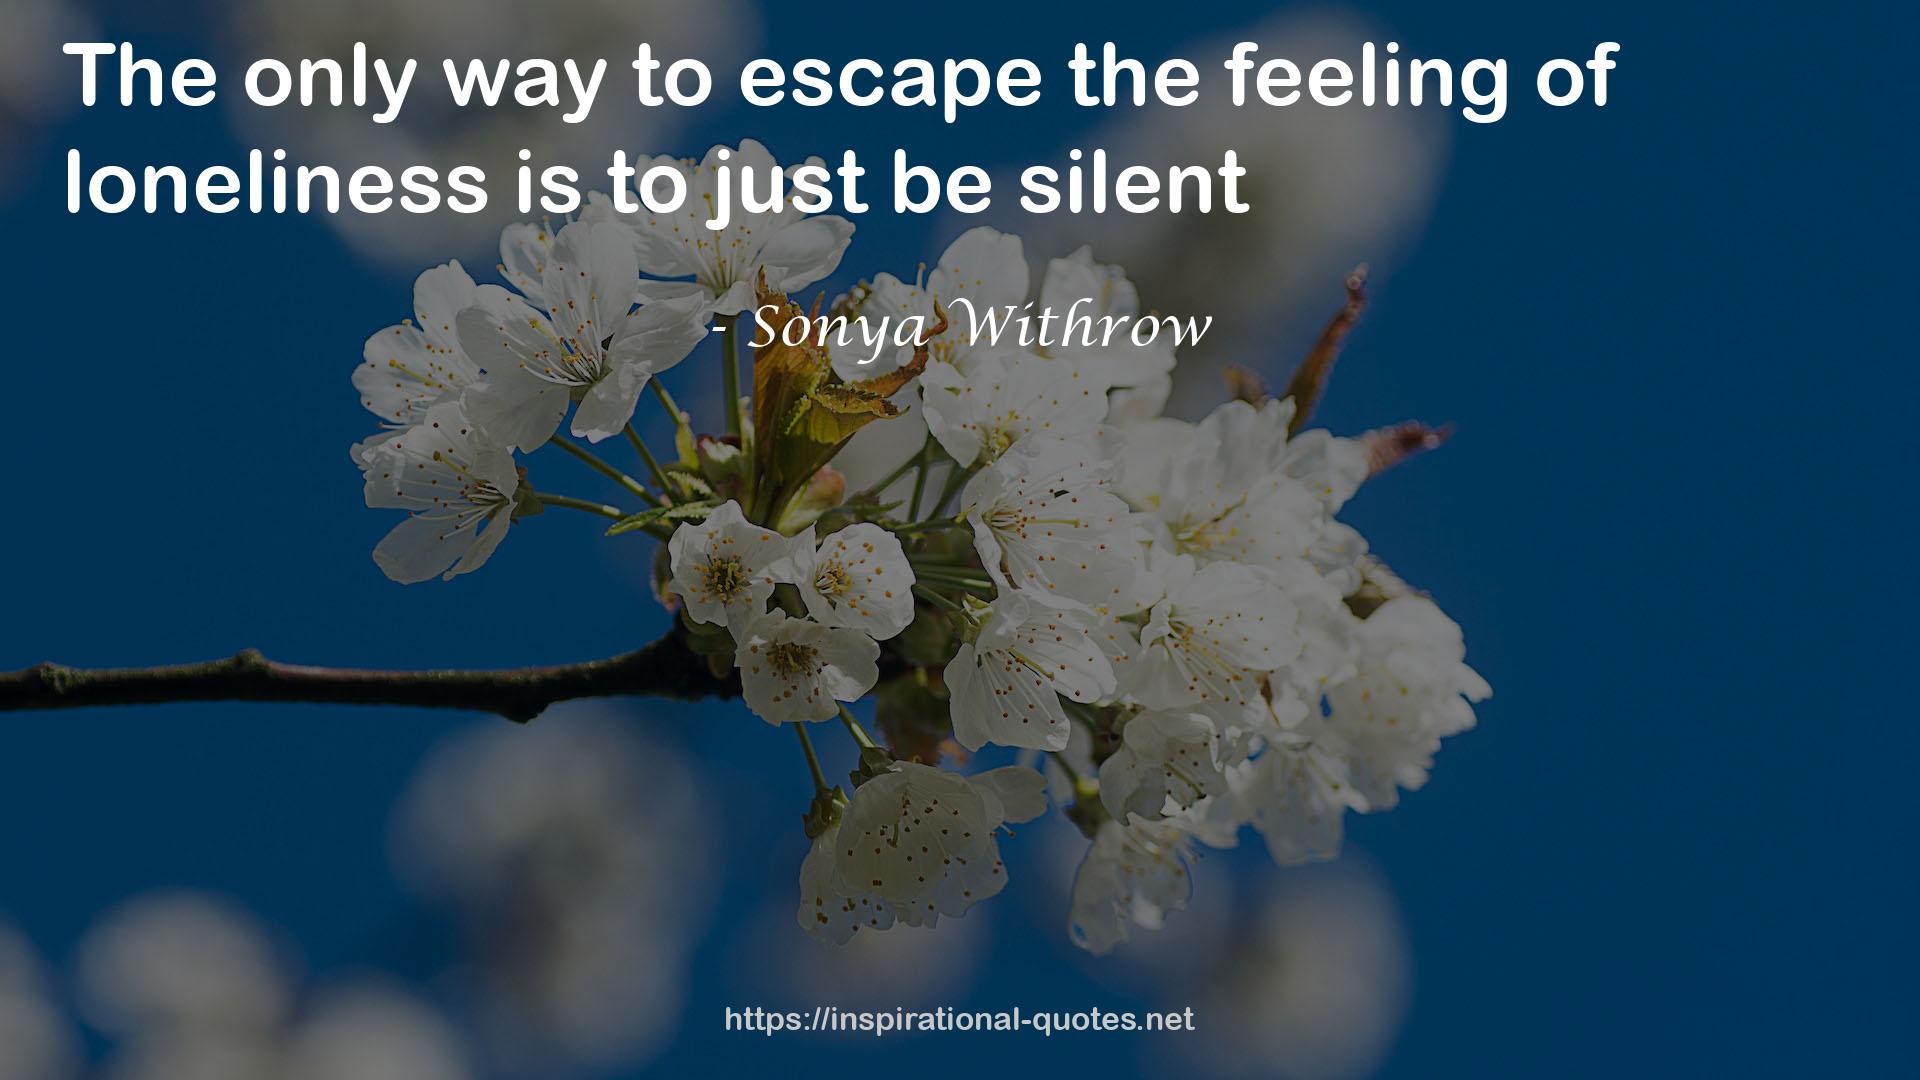 Sonya Withrow QUOTES